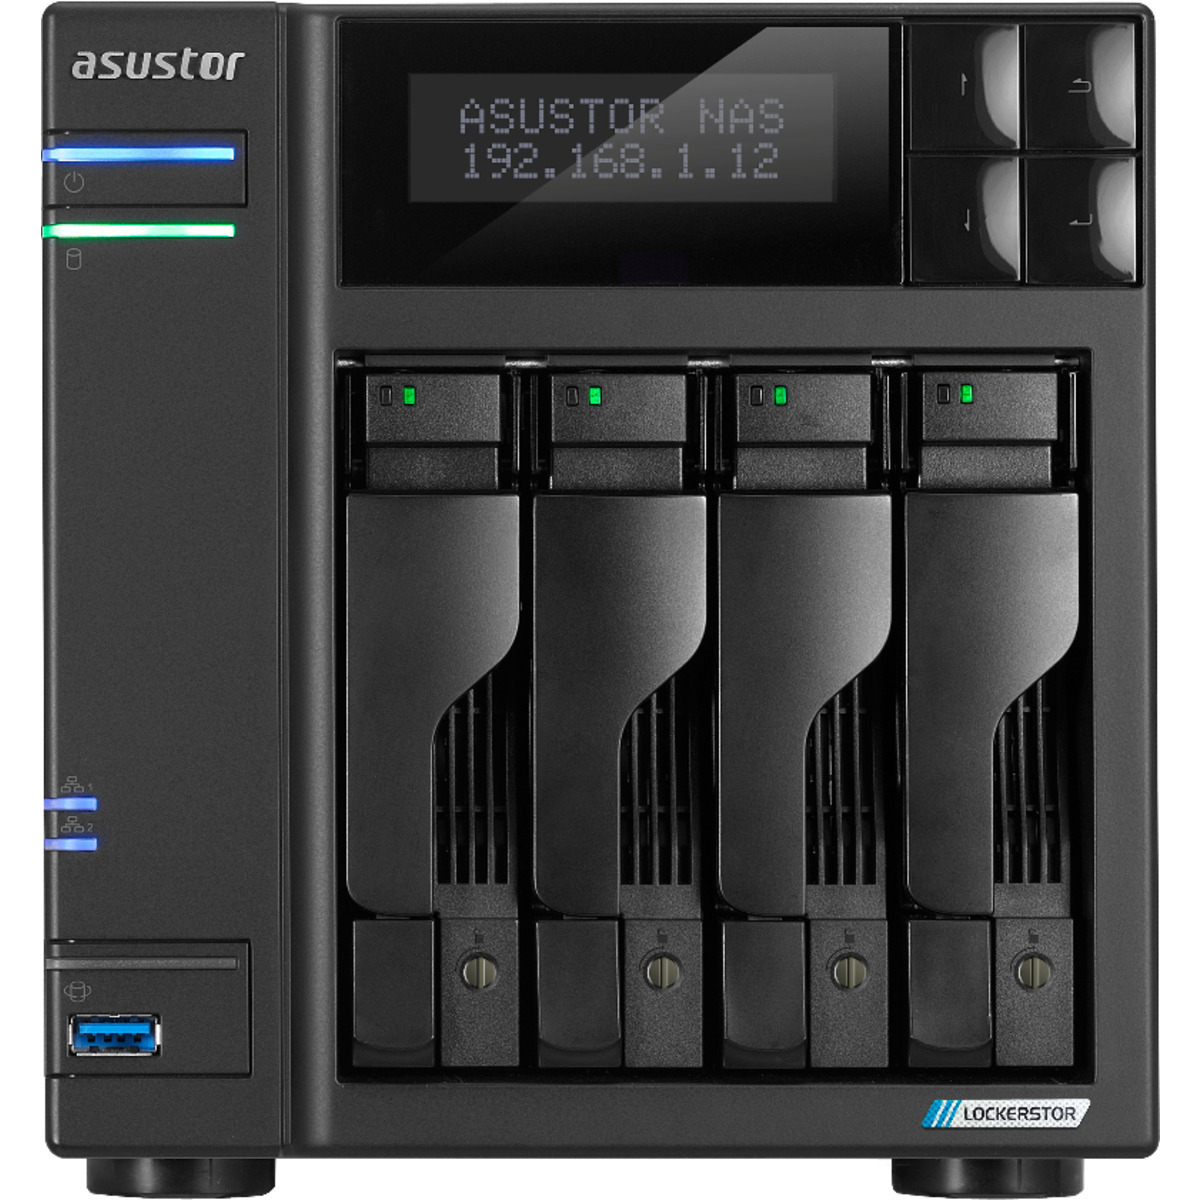 ASUSTOR LOCKERSTOR 4 Gen2 AS6704T 32tb 4-Bay Desktop Multimedia / Power User / Business NAS - Network Attached Storage Device 4x8tb Western Digital Red Plus WD80EFPX 3.5 7200rpm SATA 6Gb/s HDD NAS Class Drives Installed - Burn-In Tested - FREE RAM UPGRADE LOCKERSTOR 4 Gen2 AS6704T